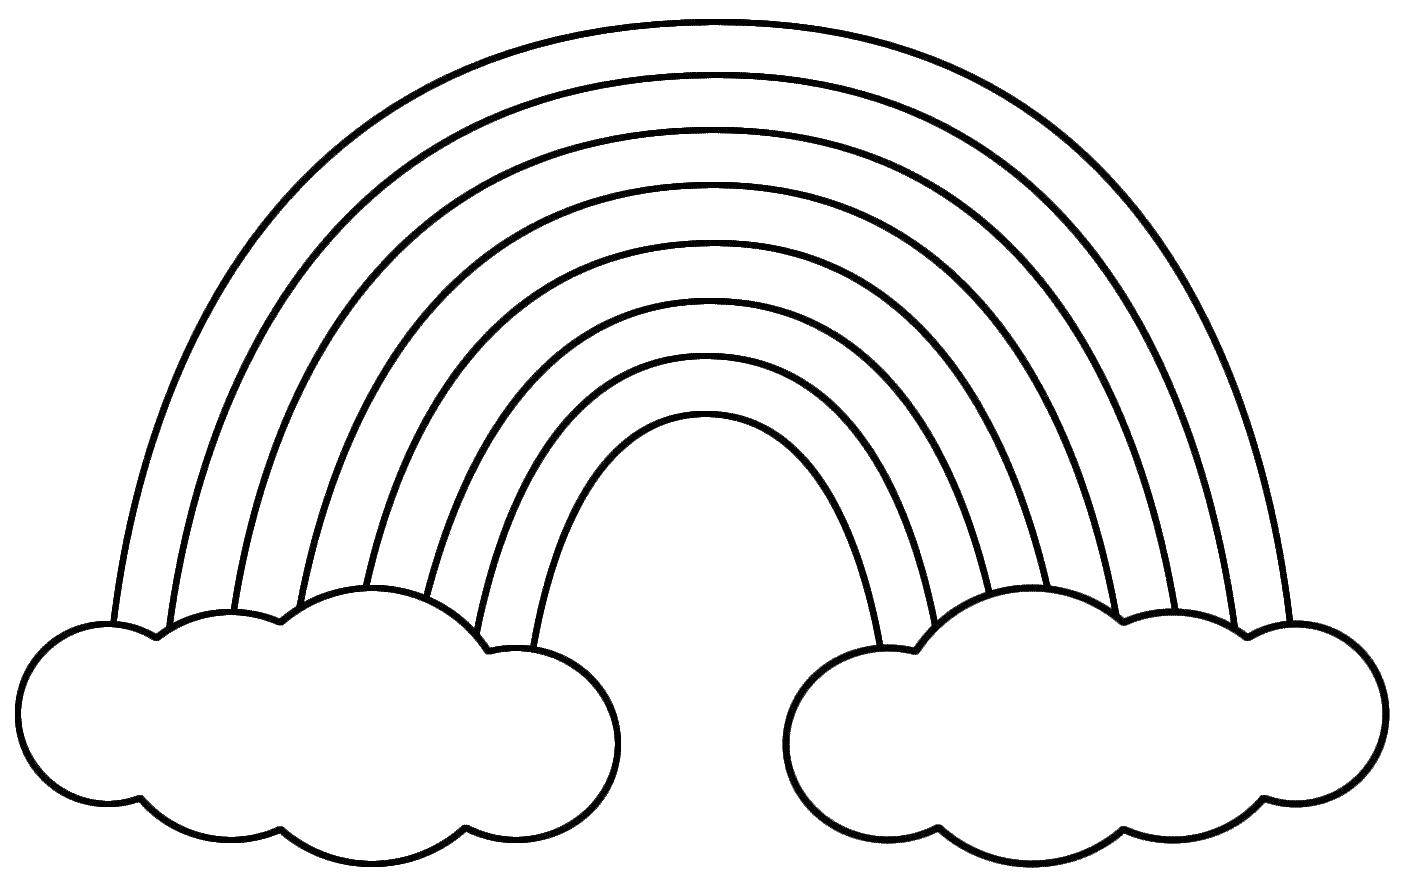 Coloring Rainbow over the clouds. Category Coloring pages for kids. Tags:  Rainbow, clouds.